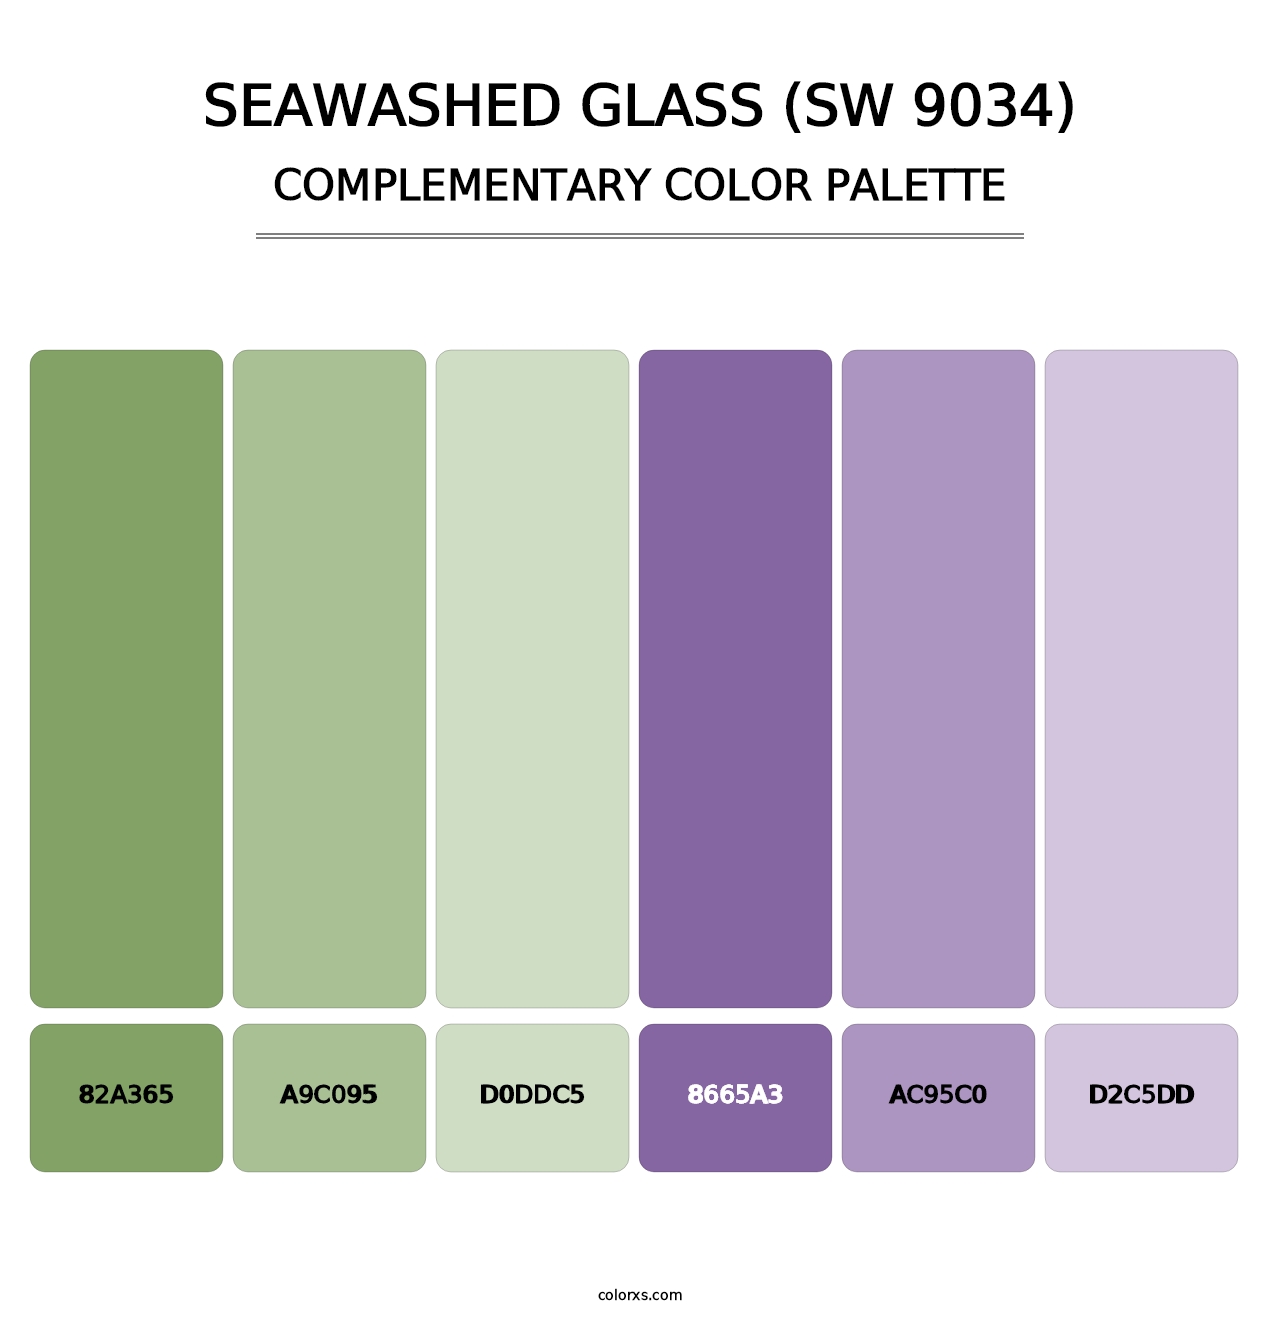 Seawashed Glass (SW 9034) - Complementary Color Palette